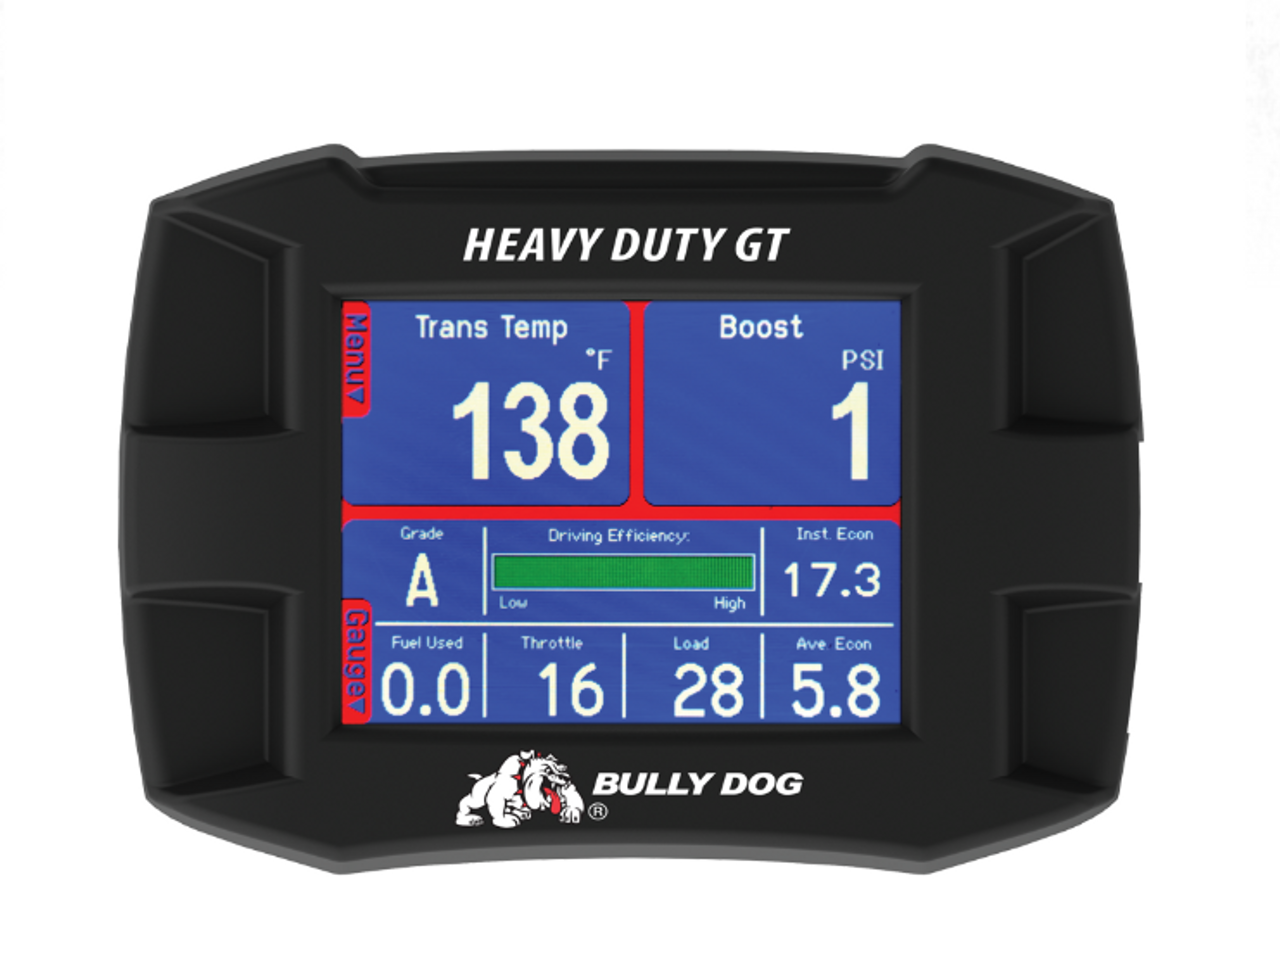 Bully Dog Heavy Duty GT Monitor (46500) Top View